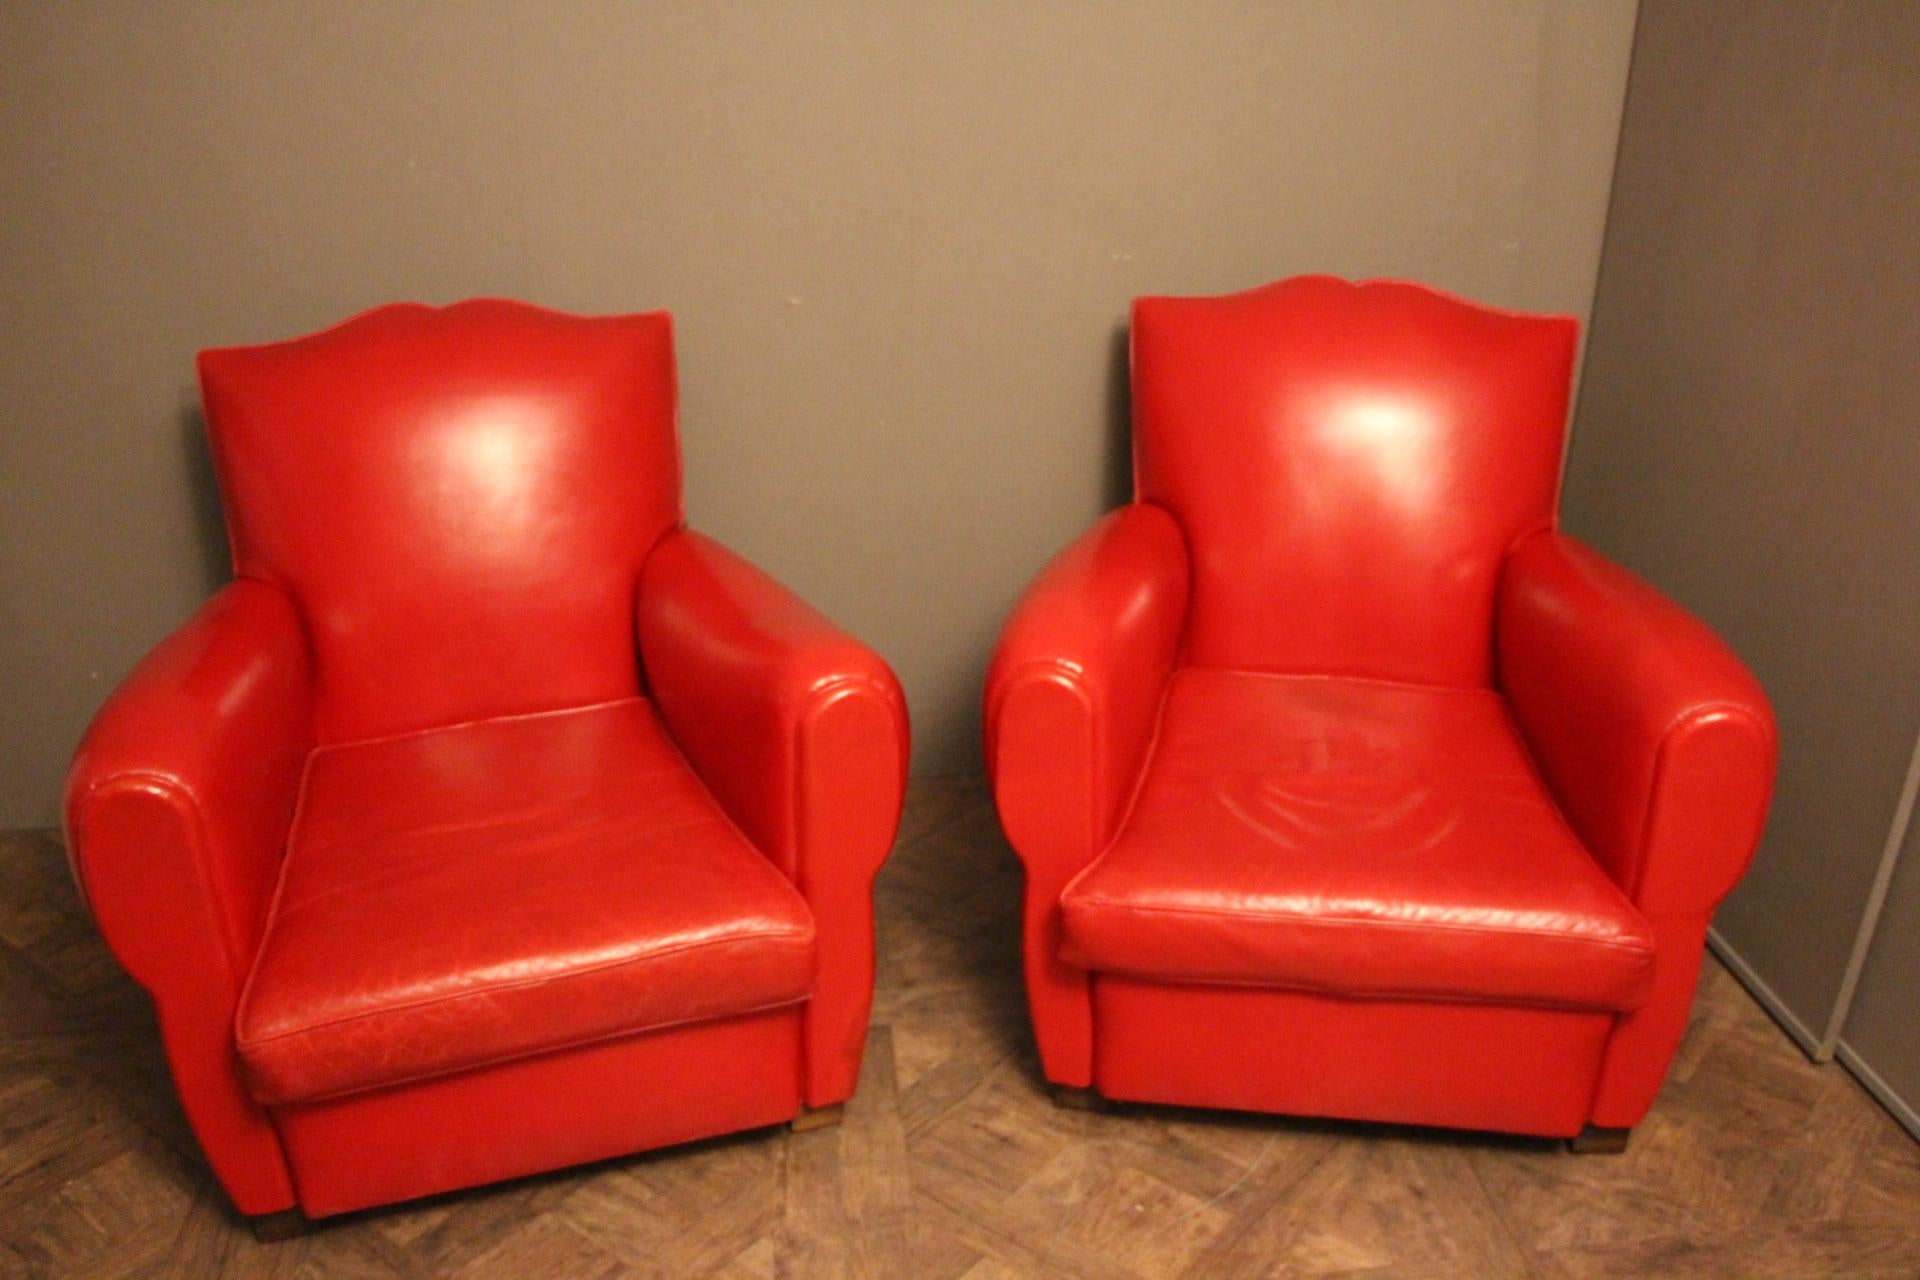 This pair of French club chairs features a vibrant poppy red color and a very nice mustache shaped back.
Separate seat cushions. Red leather trim around and studs all around their backs.
They are perfectly original and in very good condition.